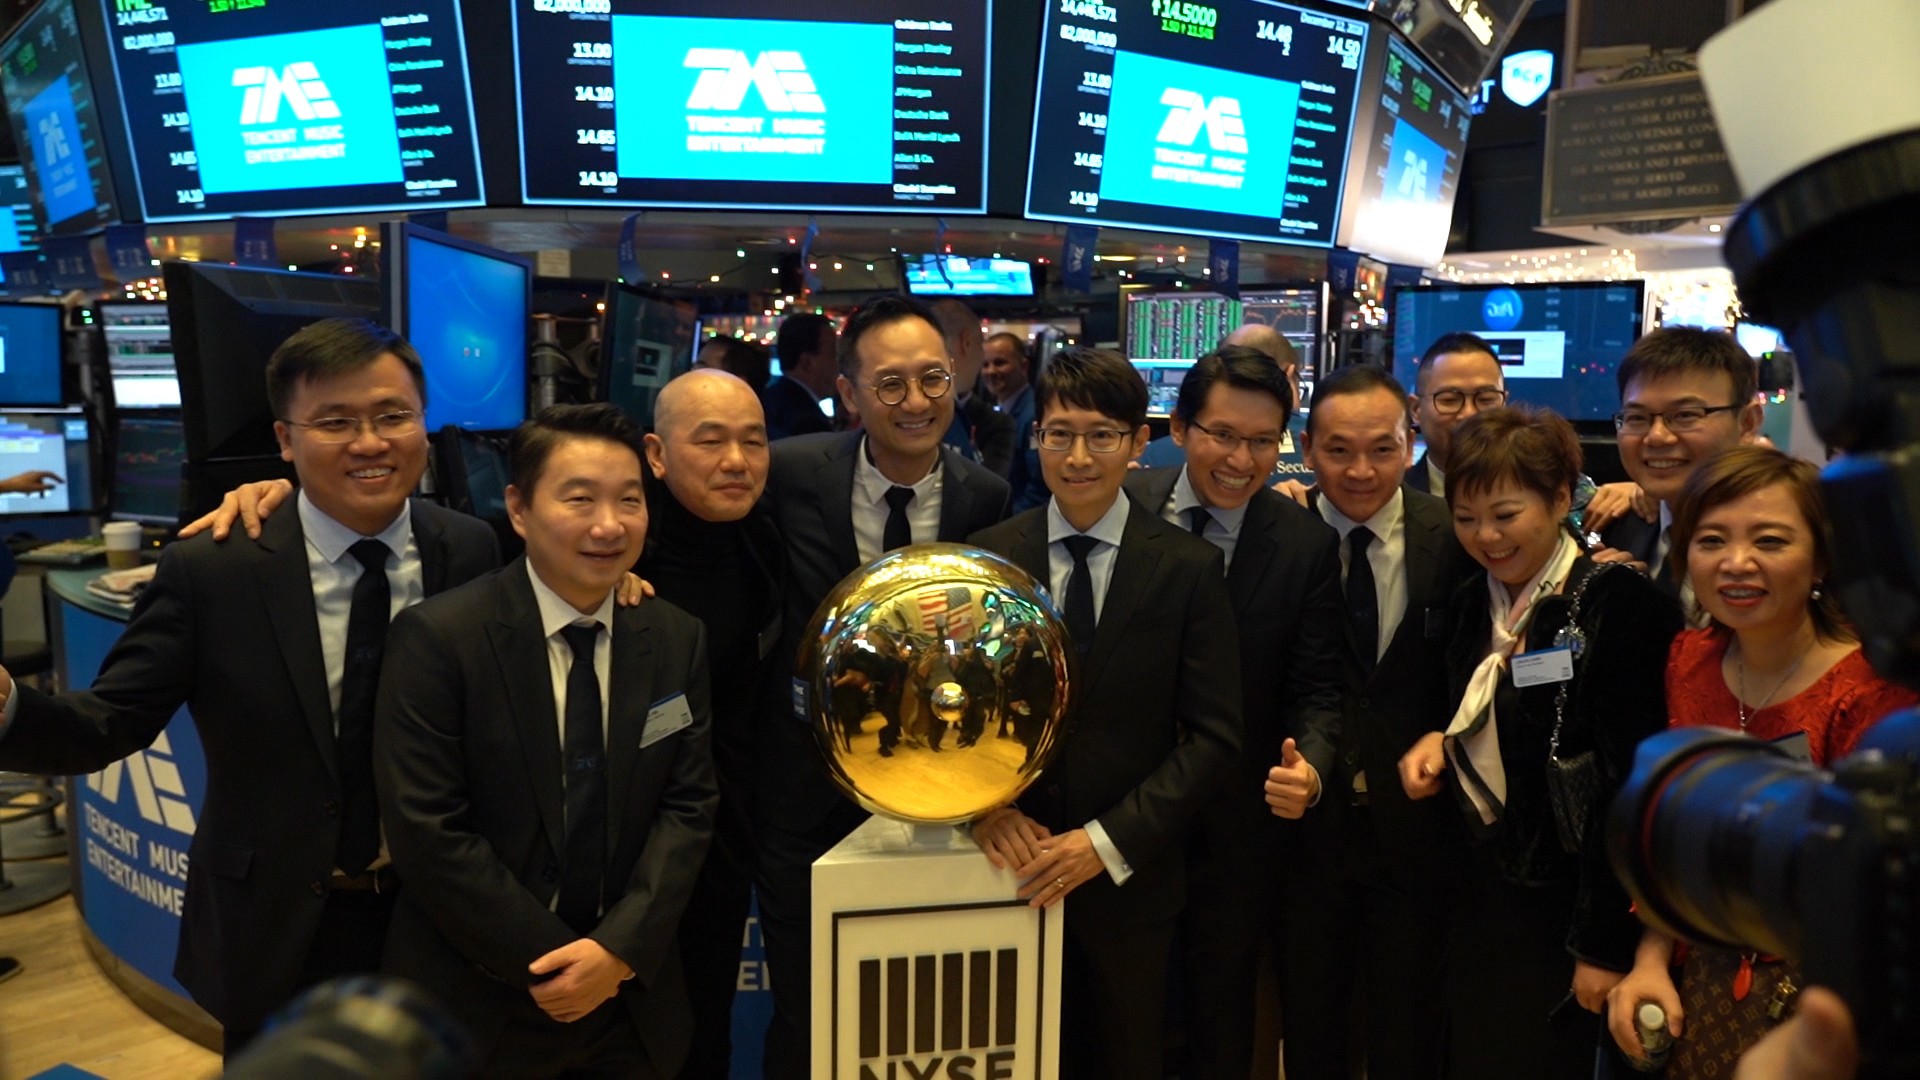 Tencent Music Entertainment launches its IPO on the NYSE on Wednesday December 12. Photo: Xinyan Yu